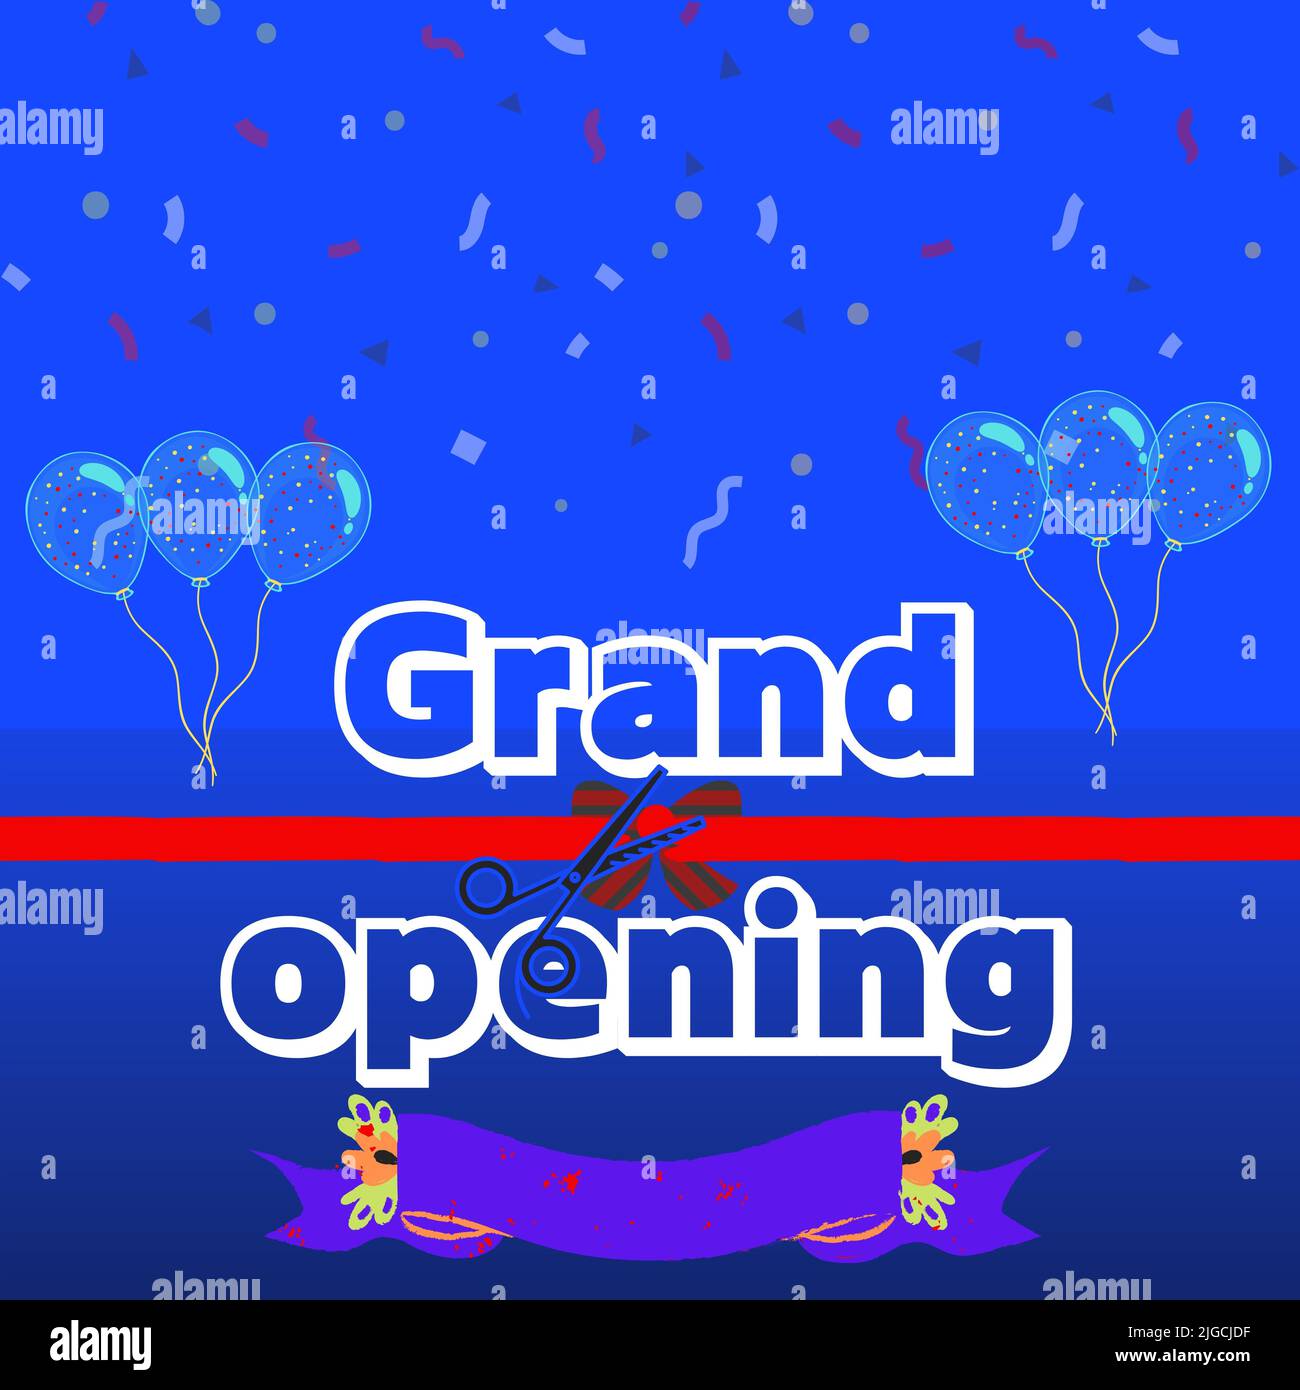 Grand opening invitation concept illustration. 3D glitter letters on abstract background with light effect. Stock Photo